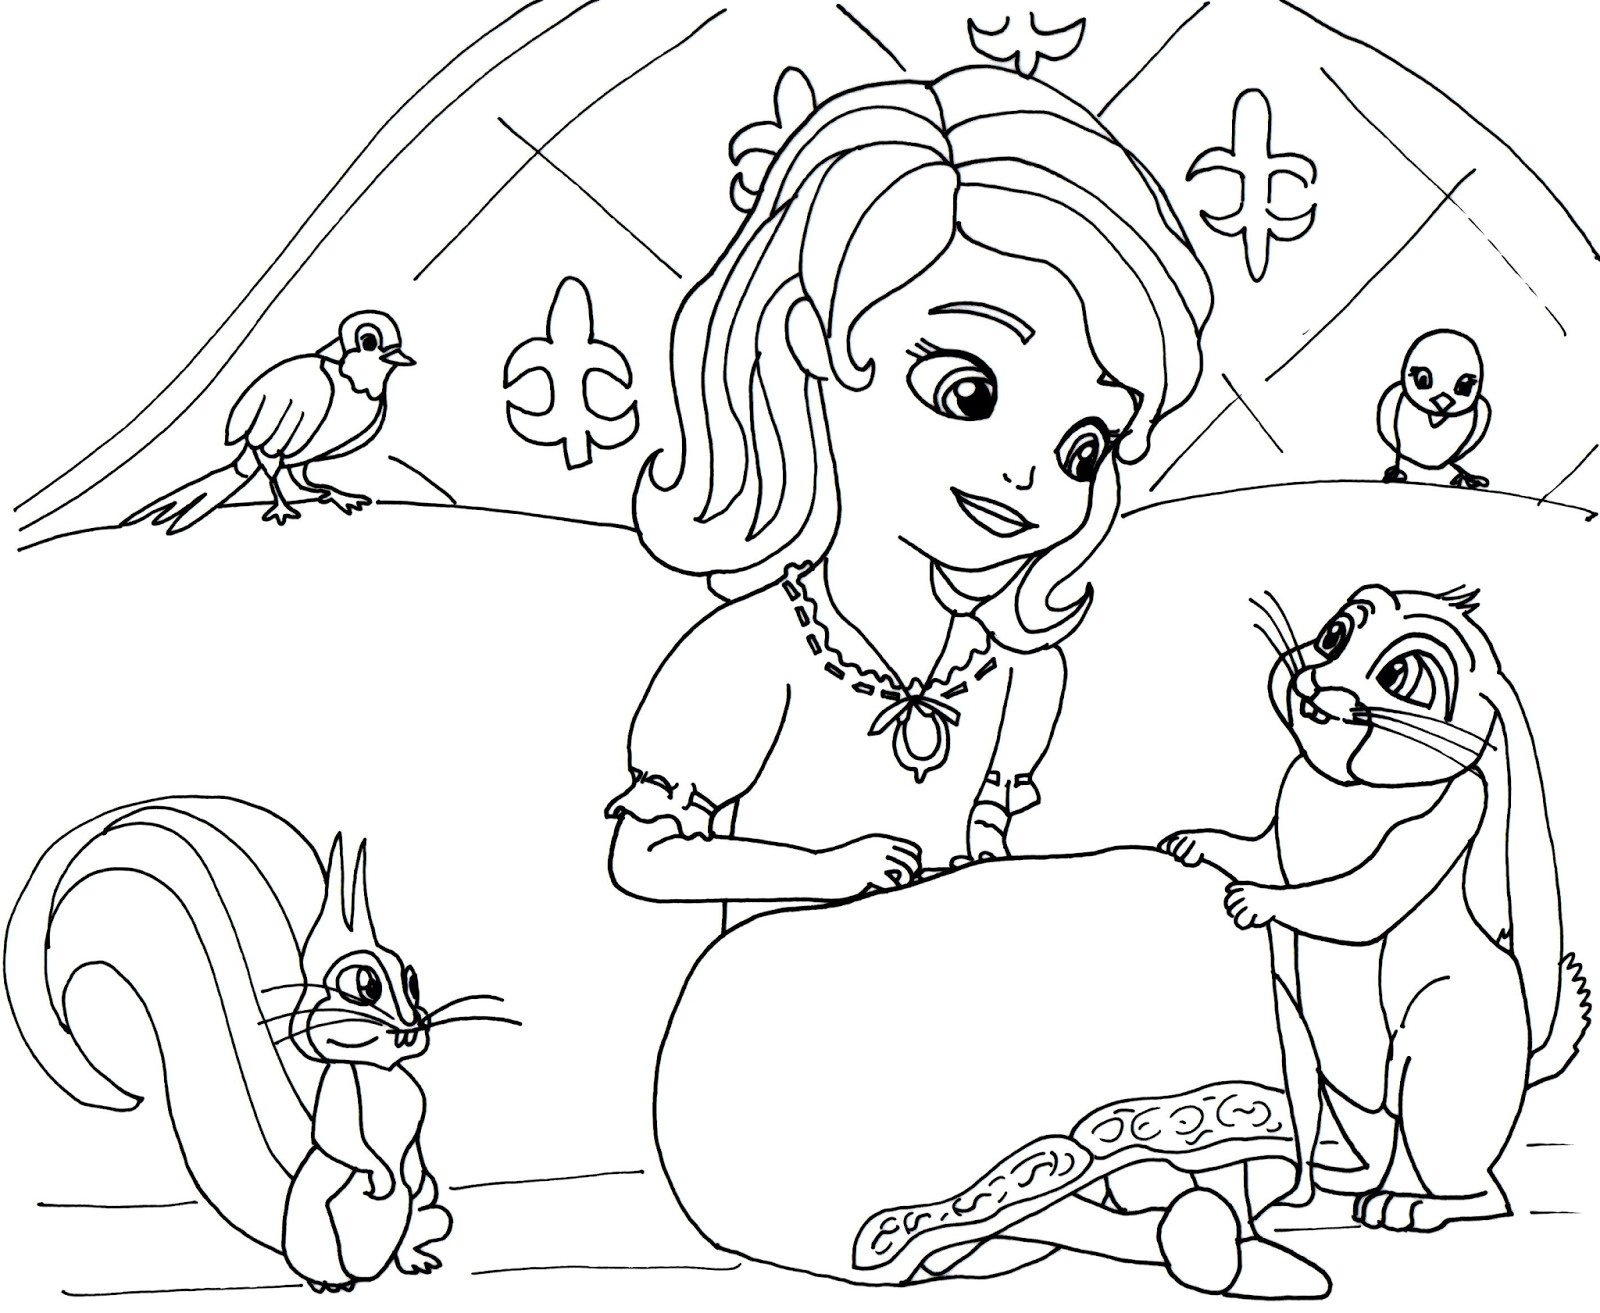 Sofia The First Printable Coloring Pages
 Sofia The First Coloring Page For Kids Coloring Draw 8707